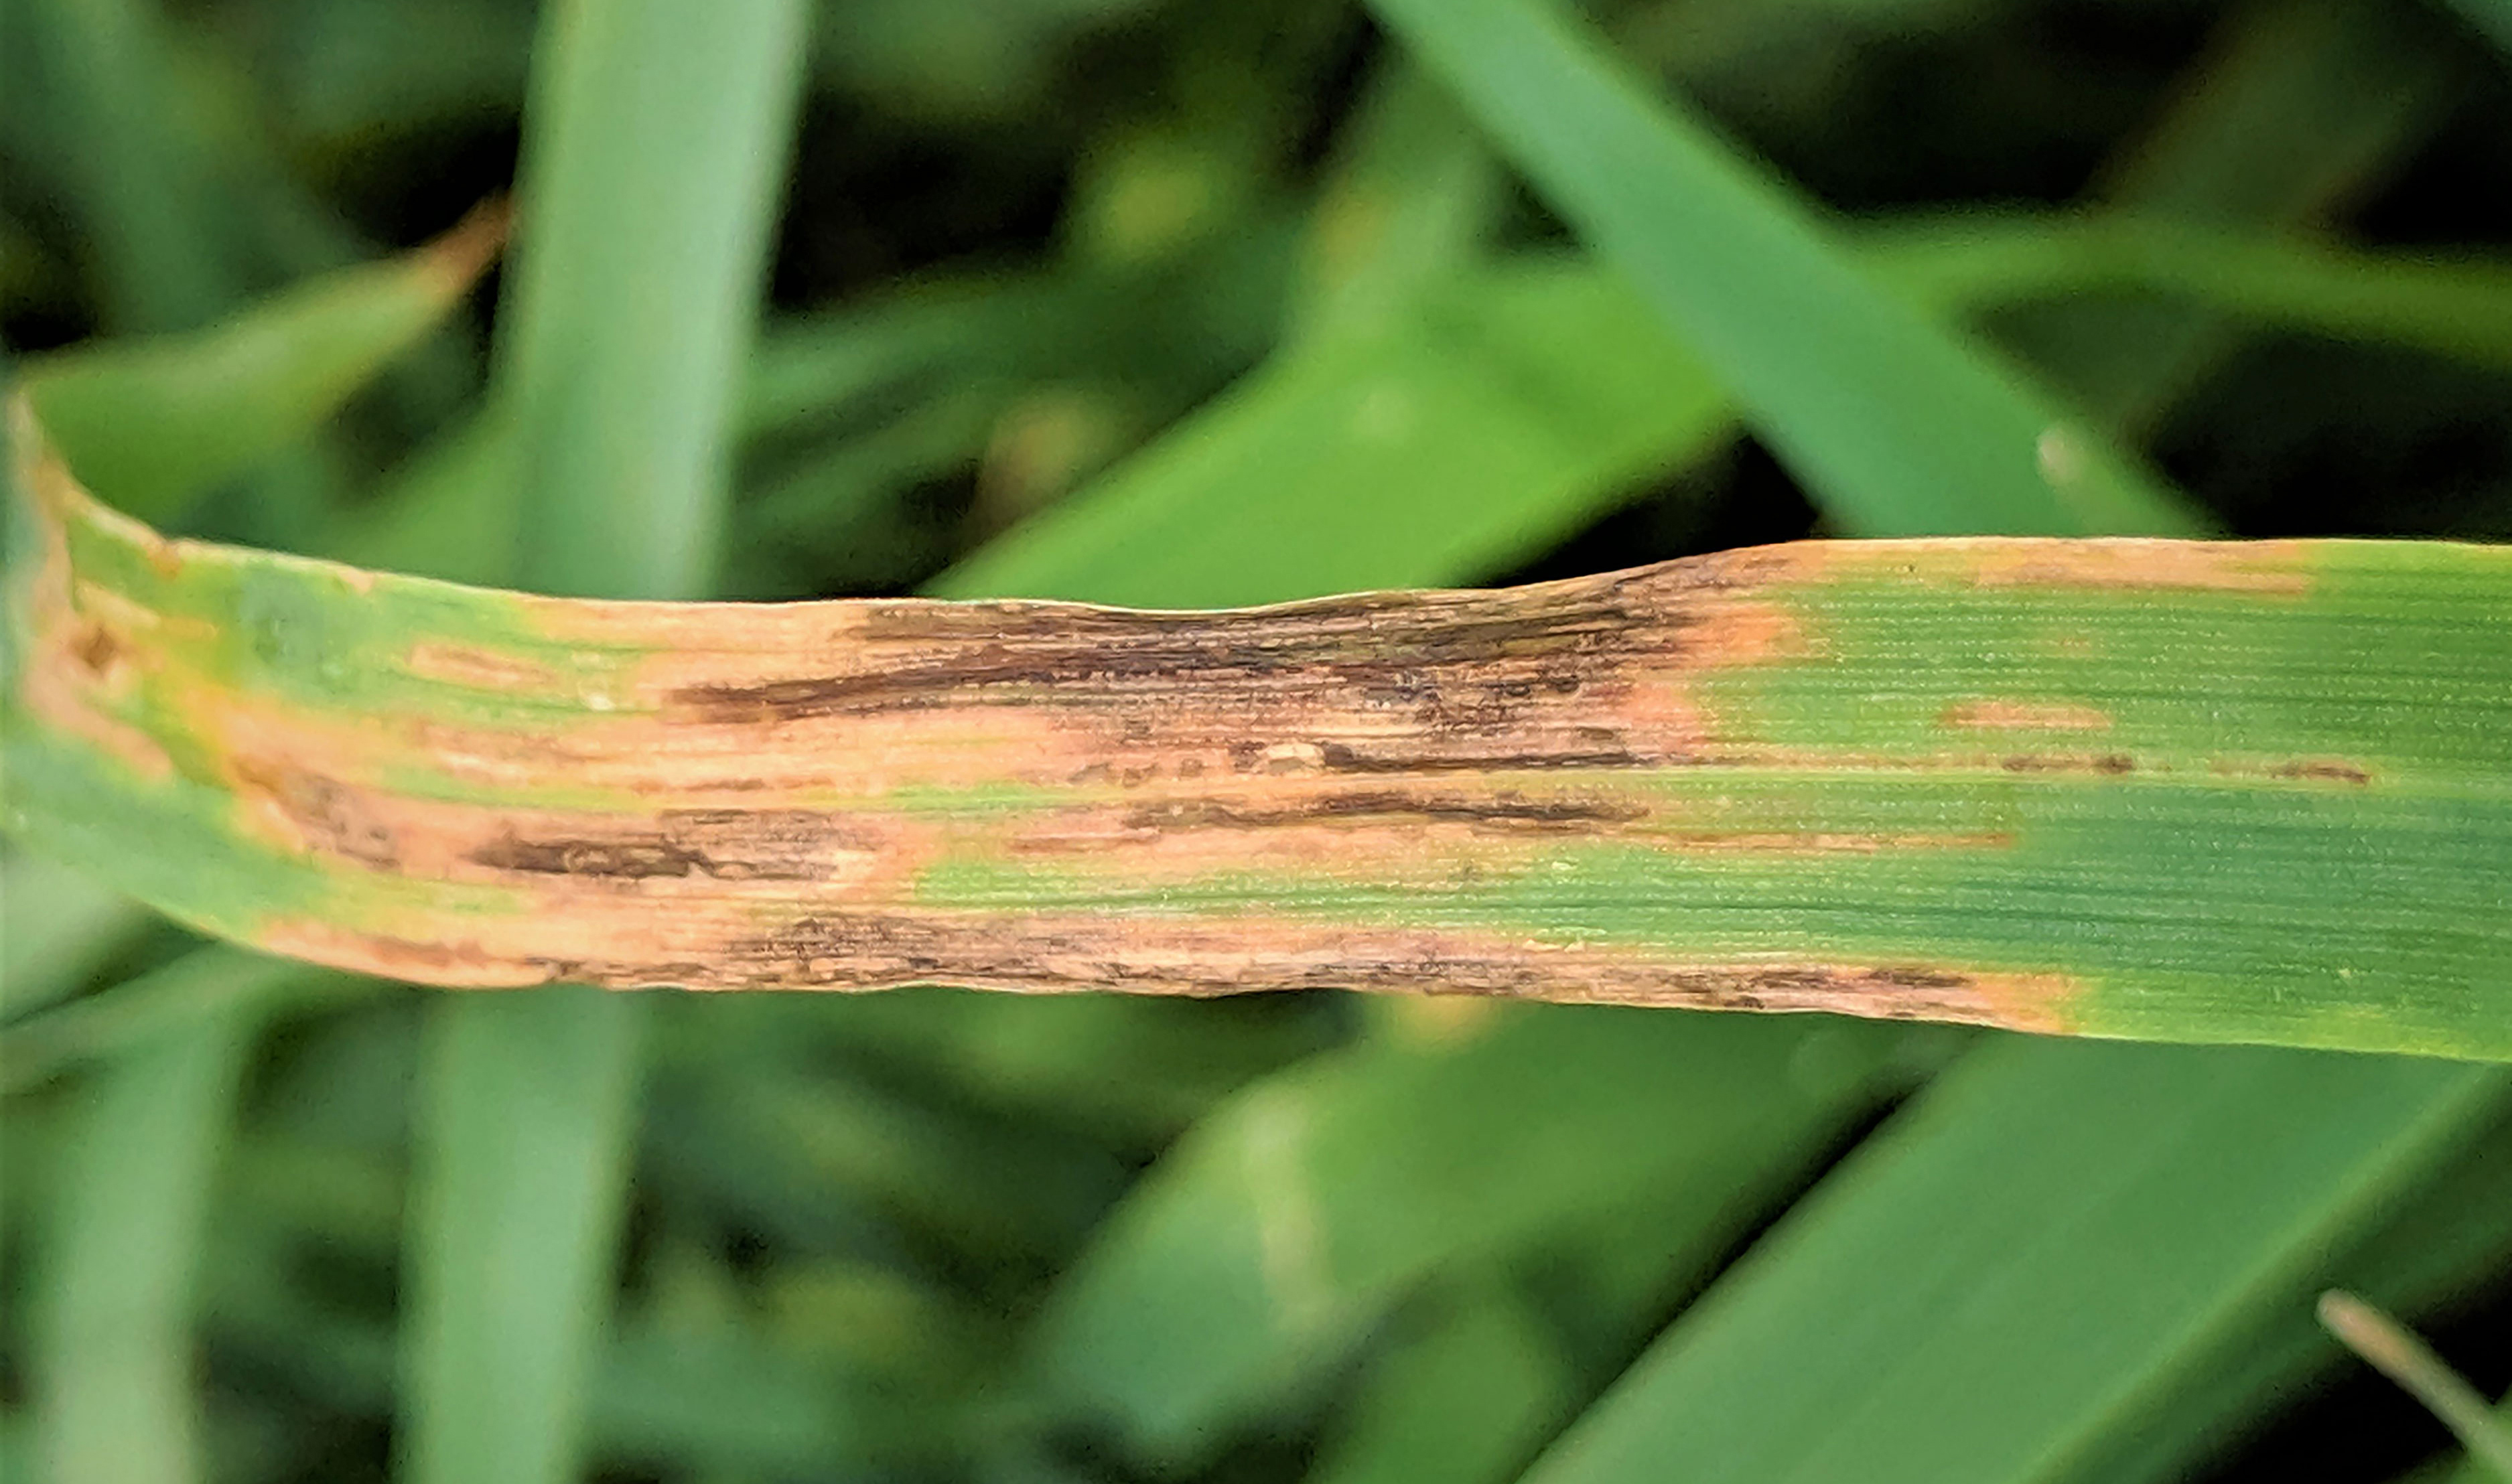 Oat leaf with water-soaked, brown longitudinal lesions on the top-half of the leaf blade.